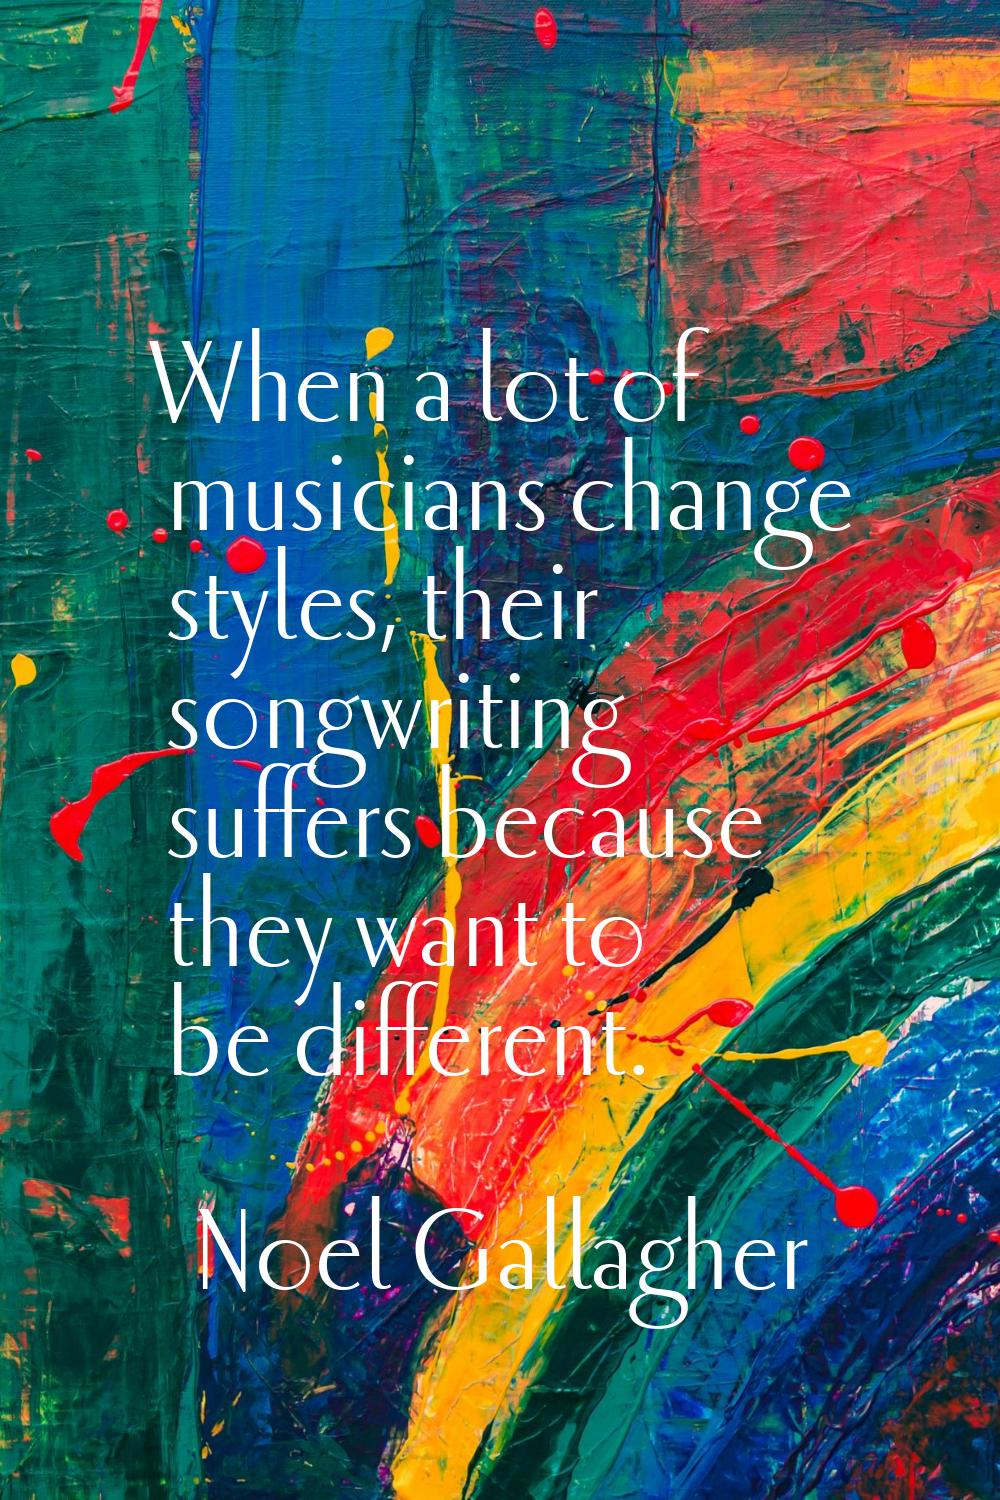 When a lot of musicians change styles, their songwriting suffers because they want to be different.